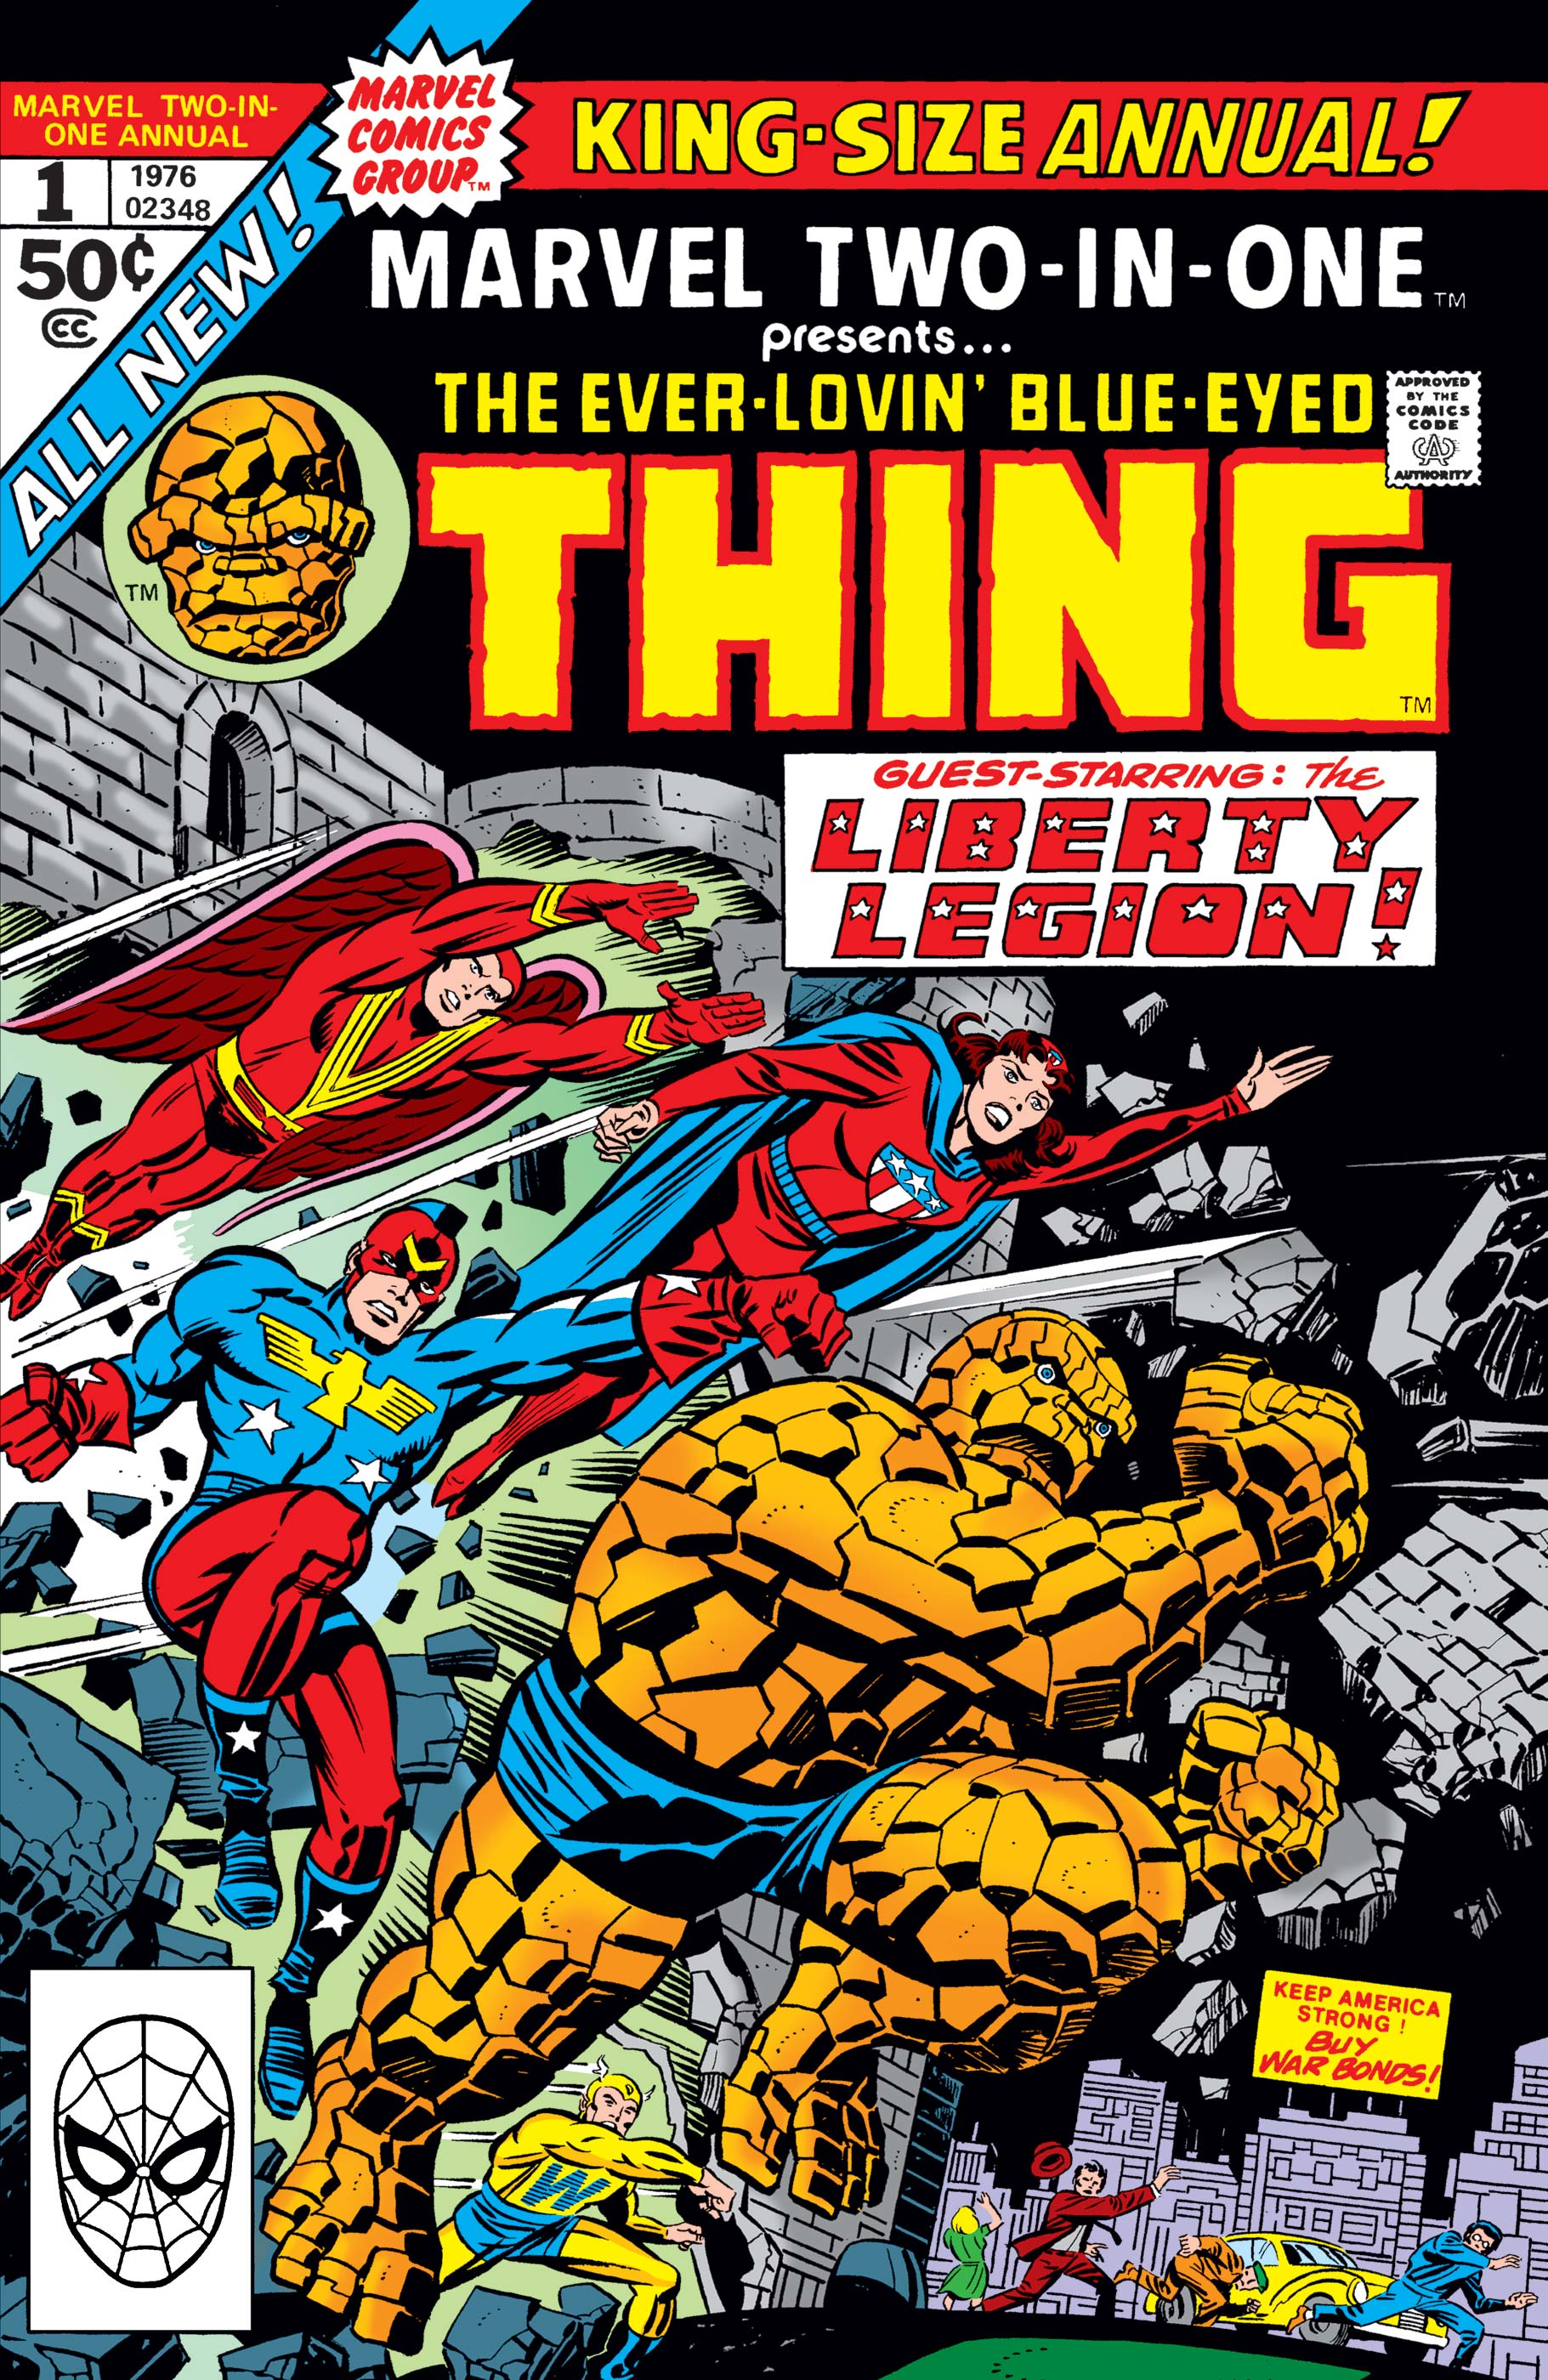 Marvel Two-in-One Annual (1976) #1